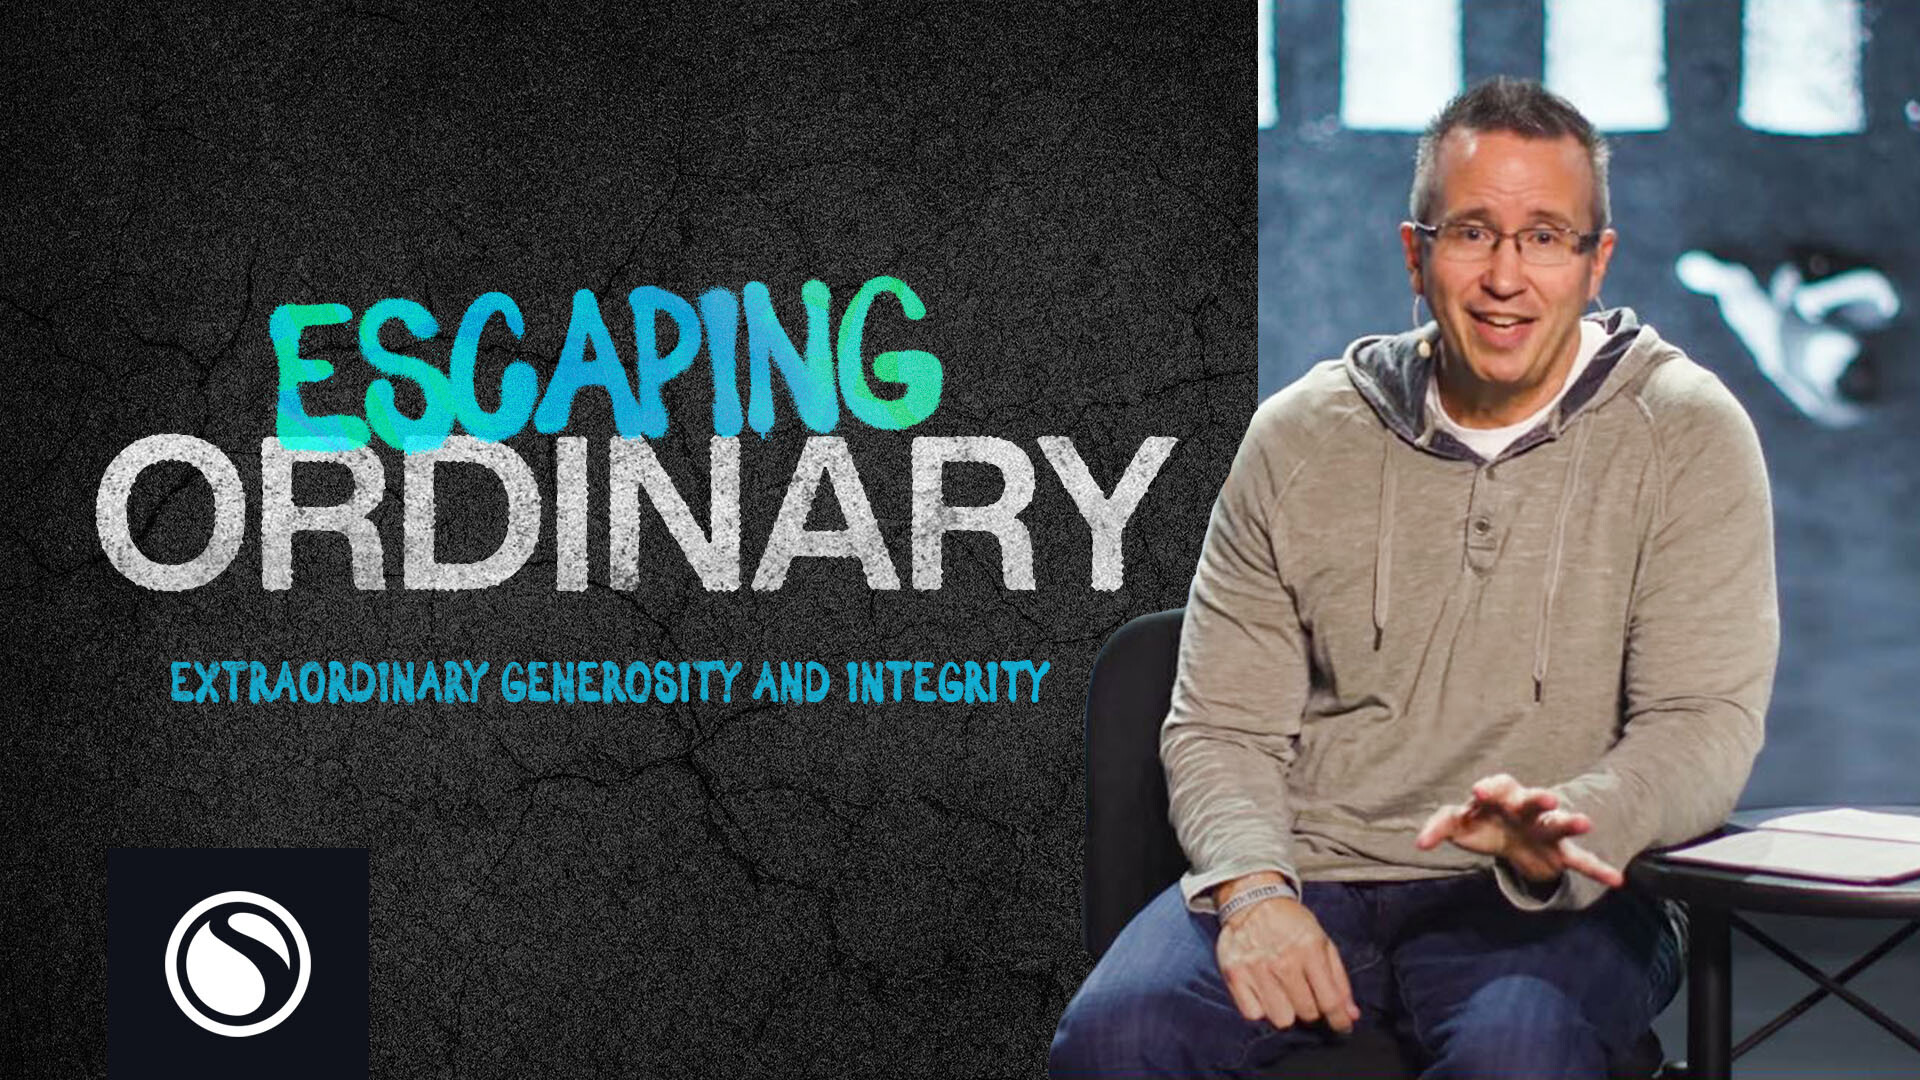 Watch Escaping Ordinary - Extraordinary Generosity and Integrity